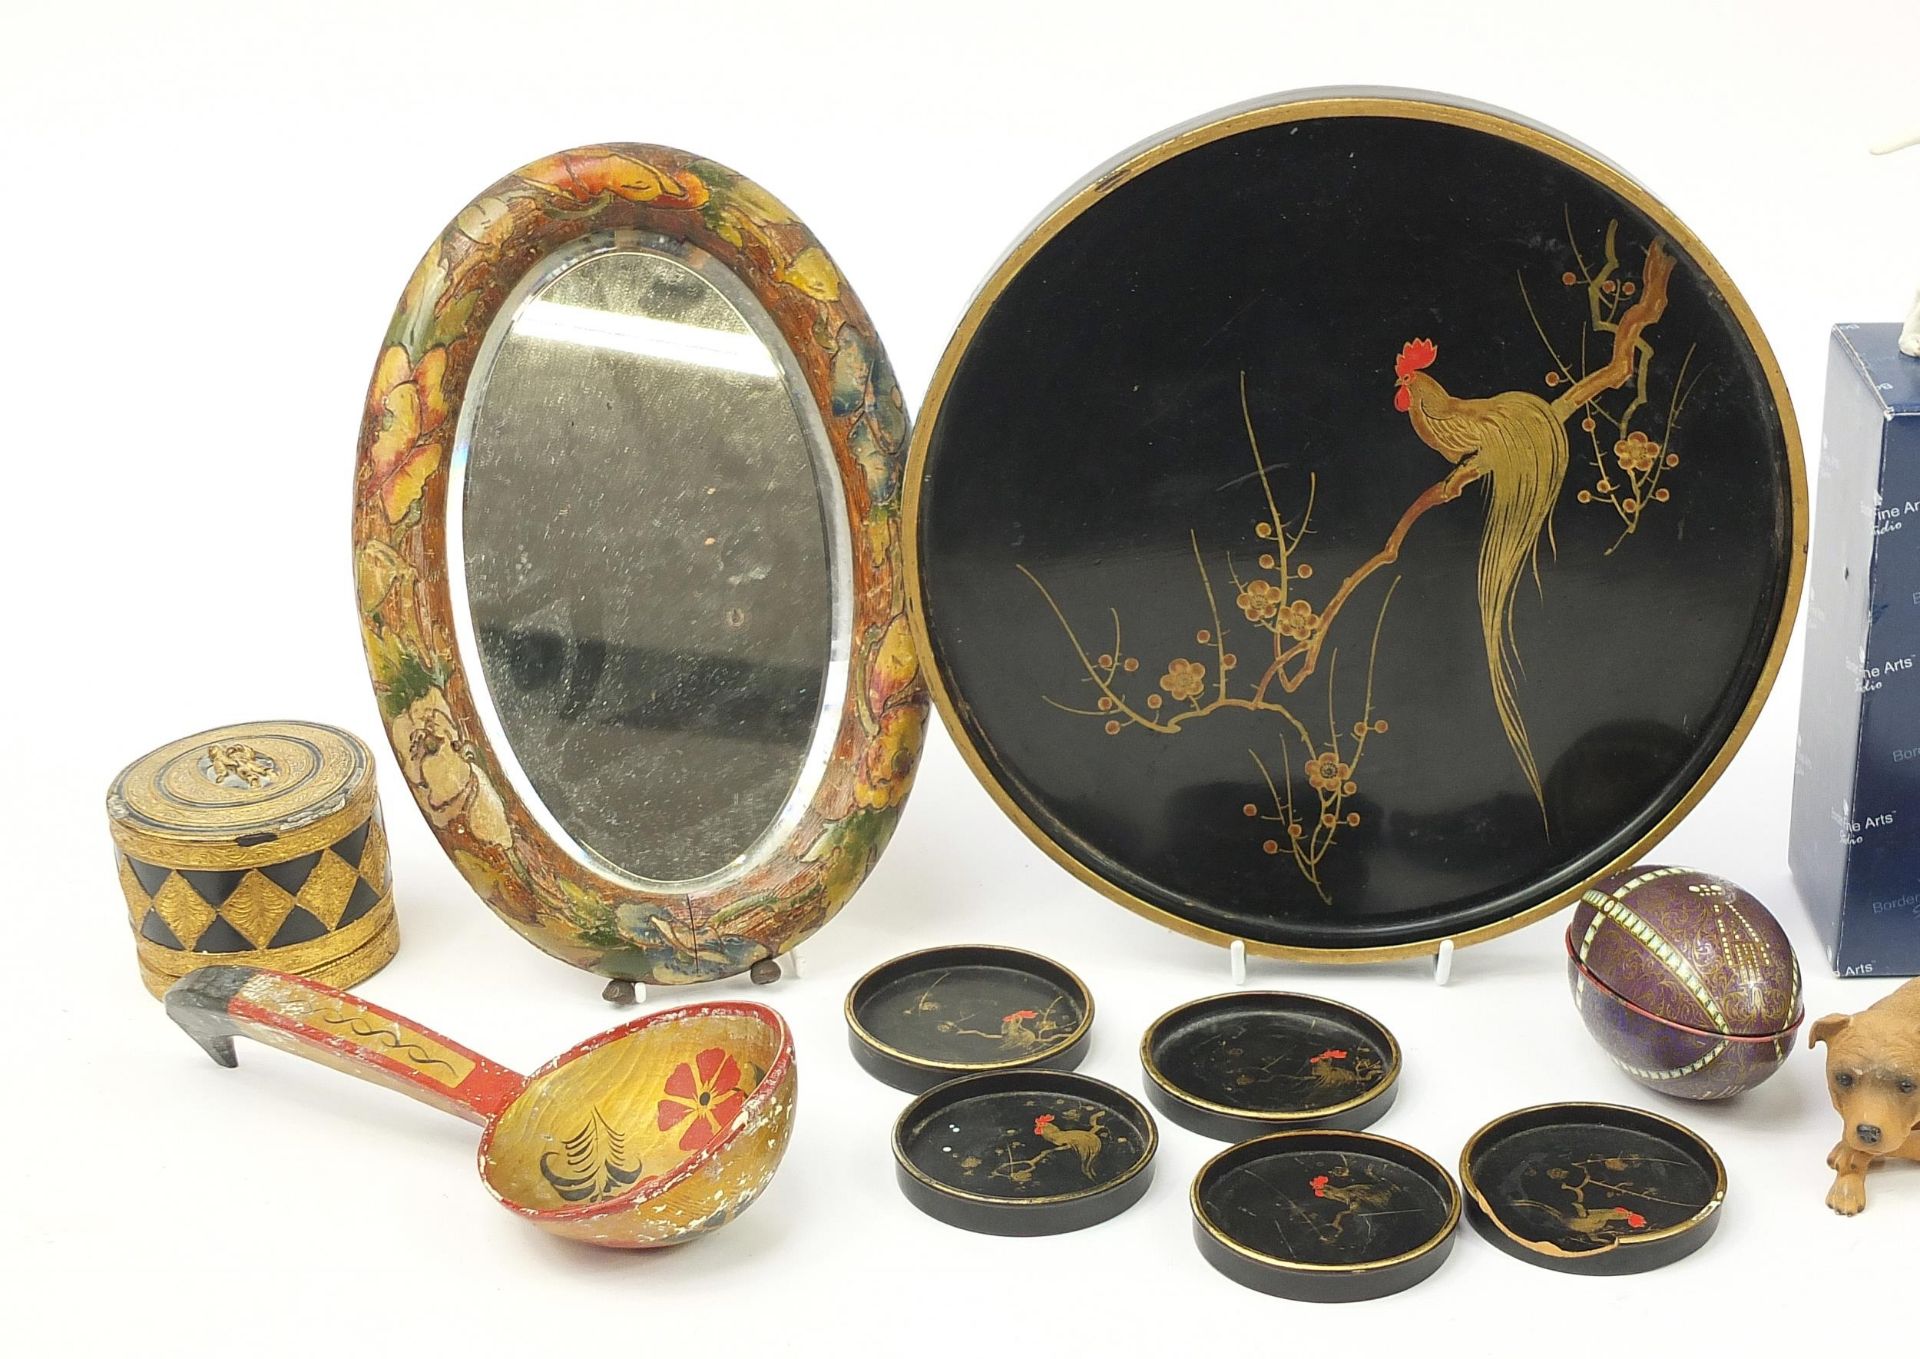 Sundry items including dogs, brass trays, cherubs and wooden box, the largest 30cm in diameter - Image 2 of 4